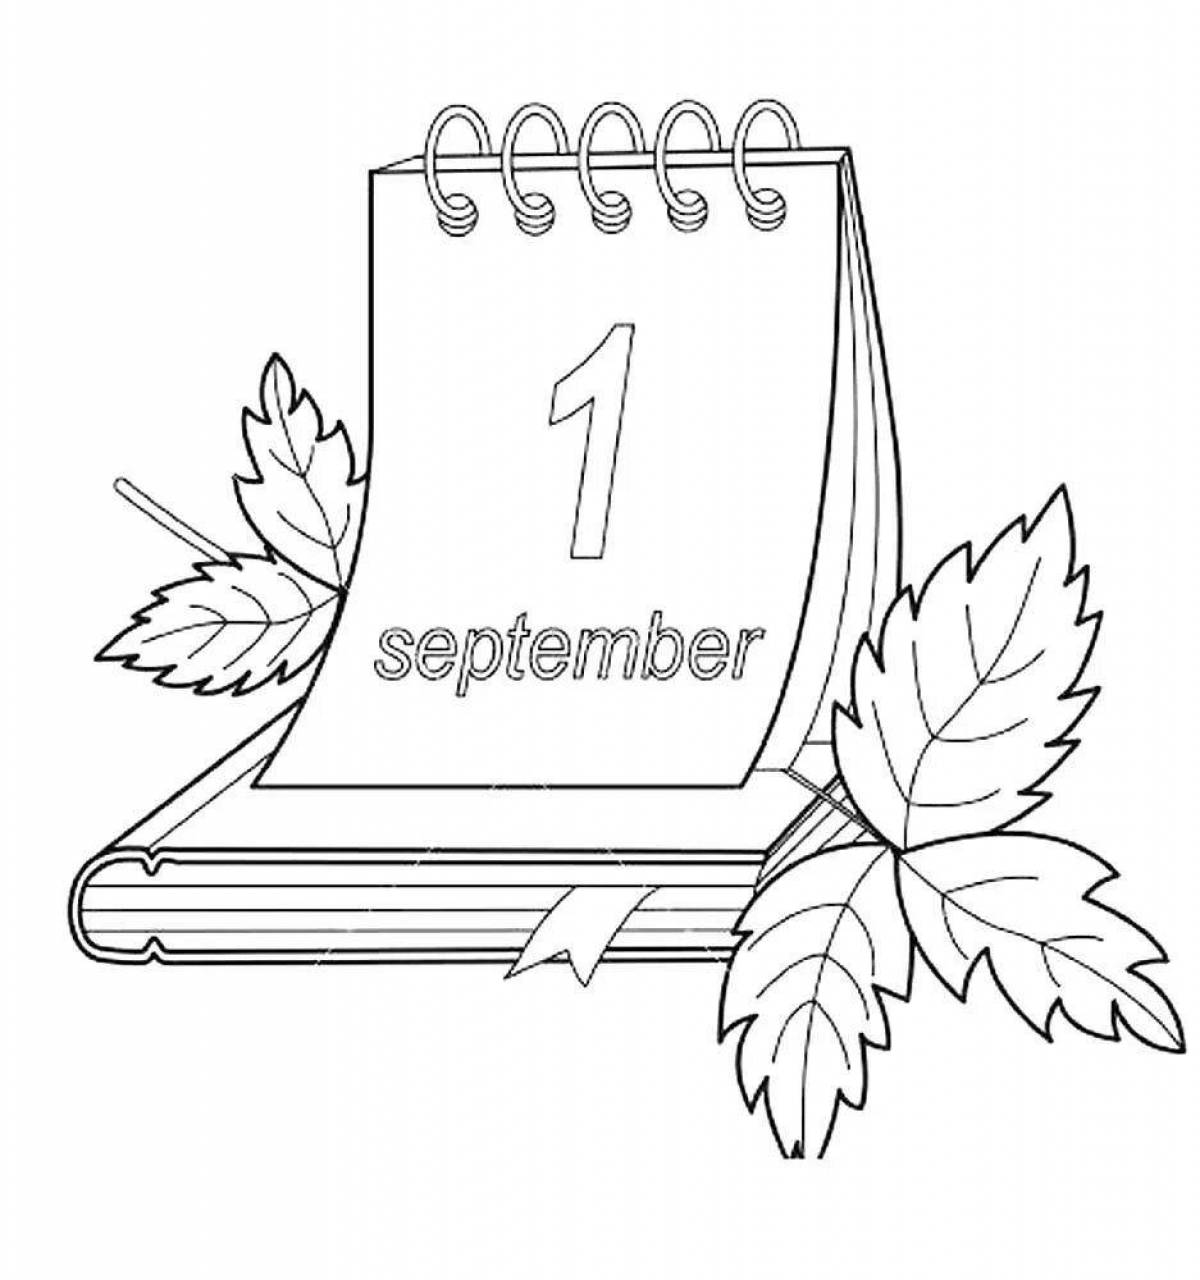 Coloring page for bold tear-off calendar